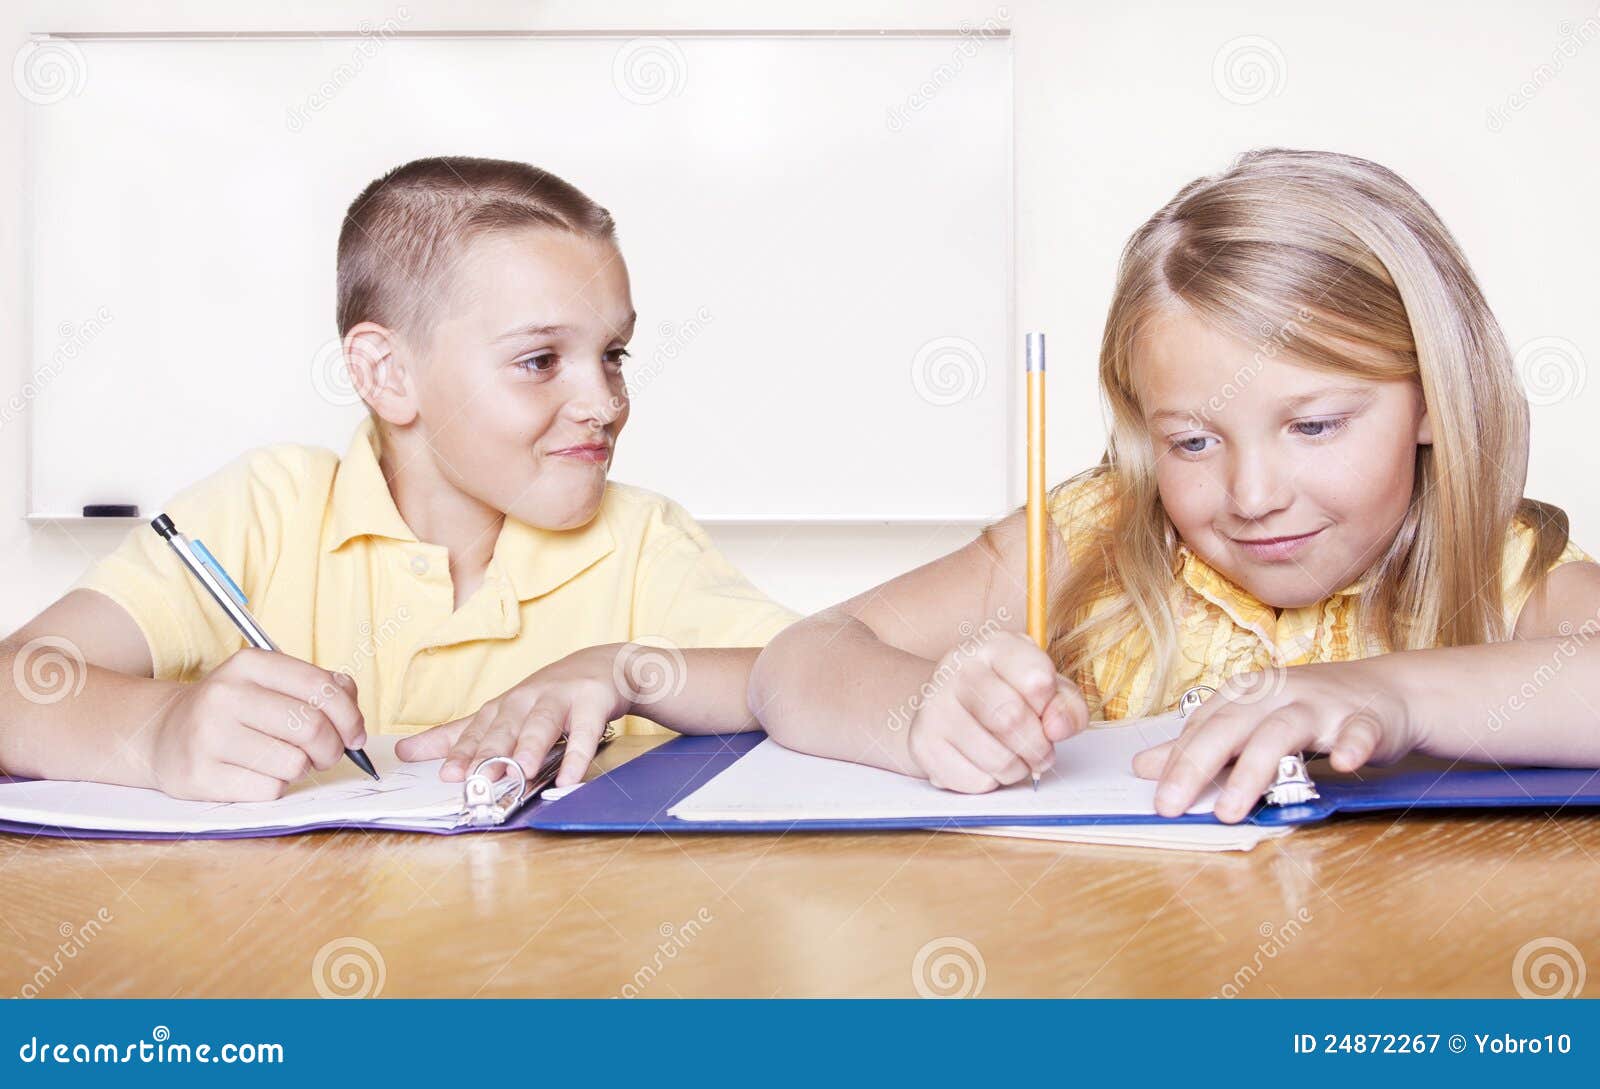 elementary students and homework